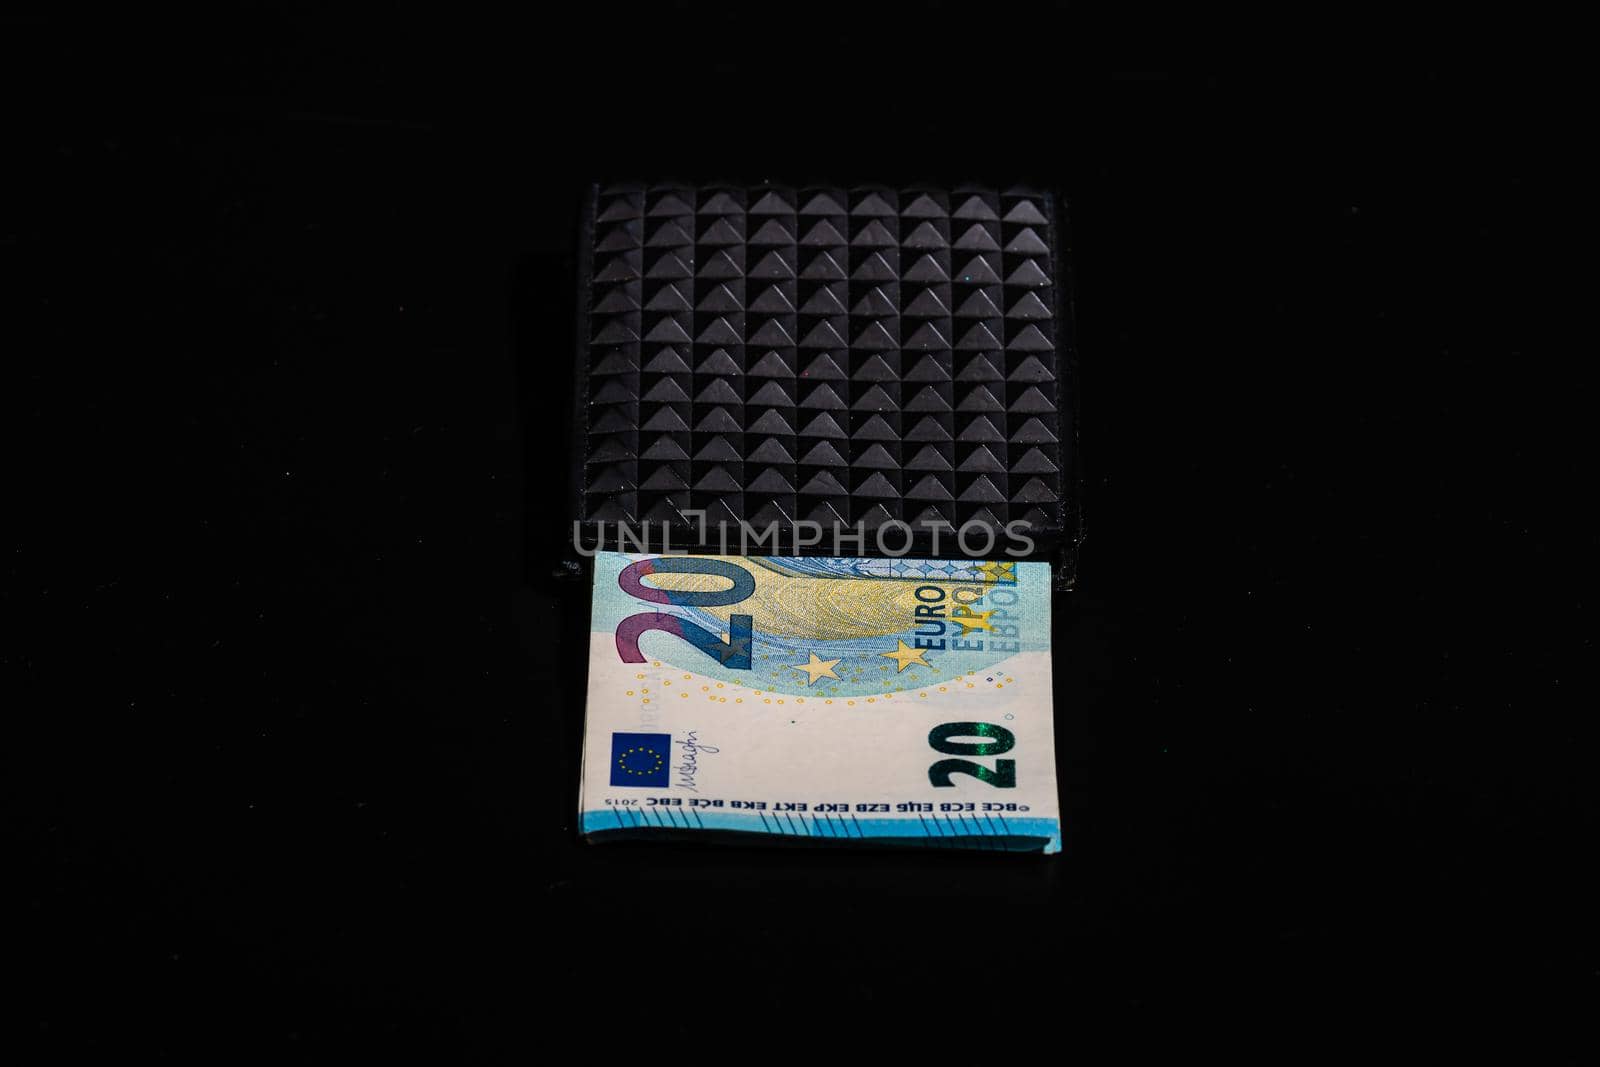 20 Euro money banknotes in black wallet isolated by vladispas